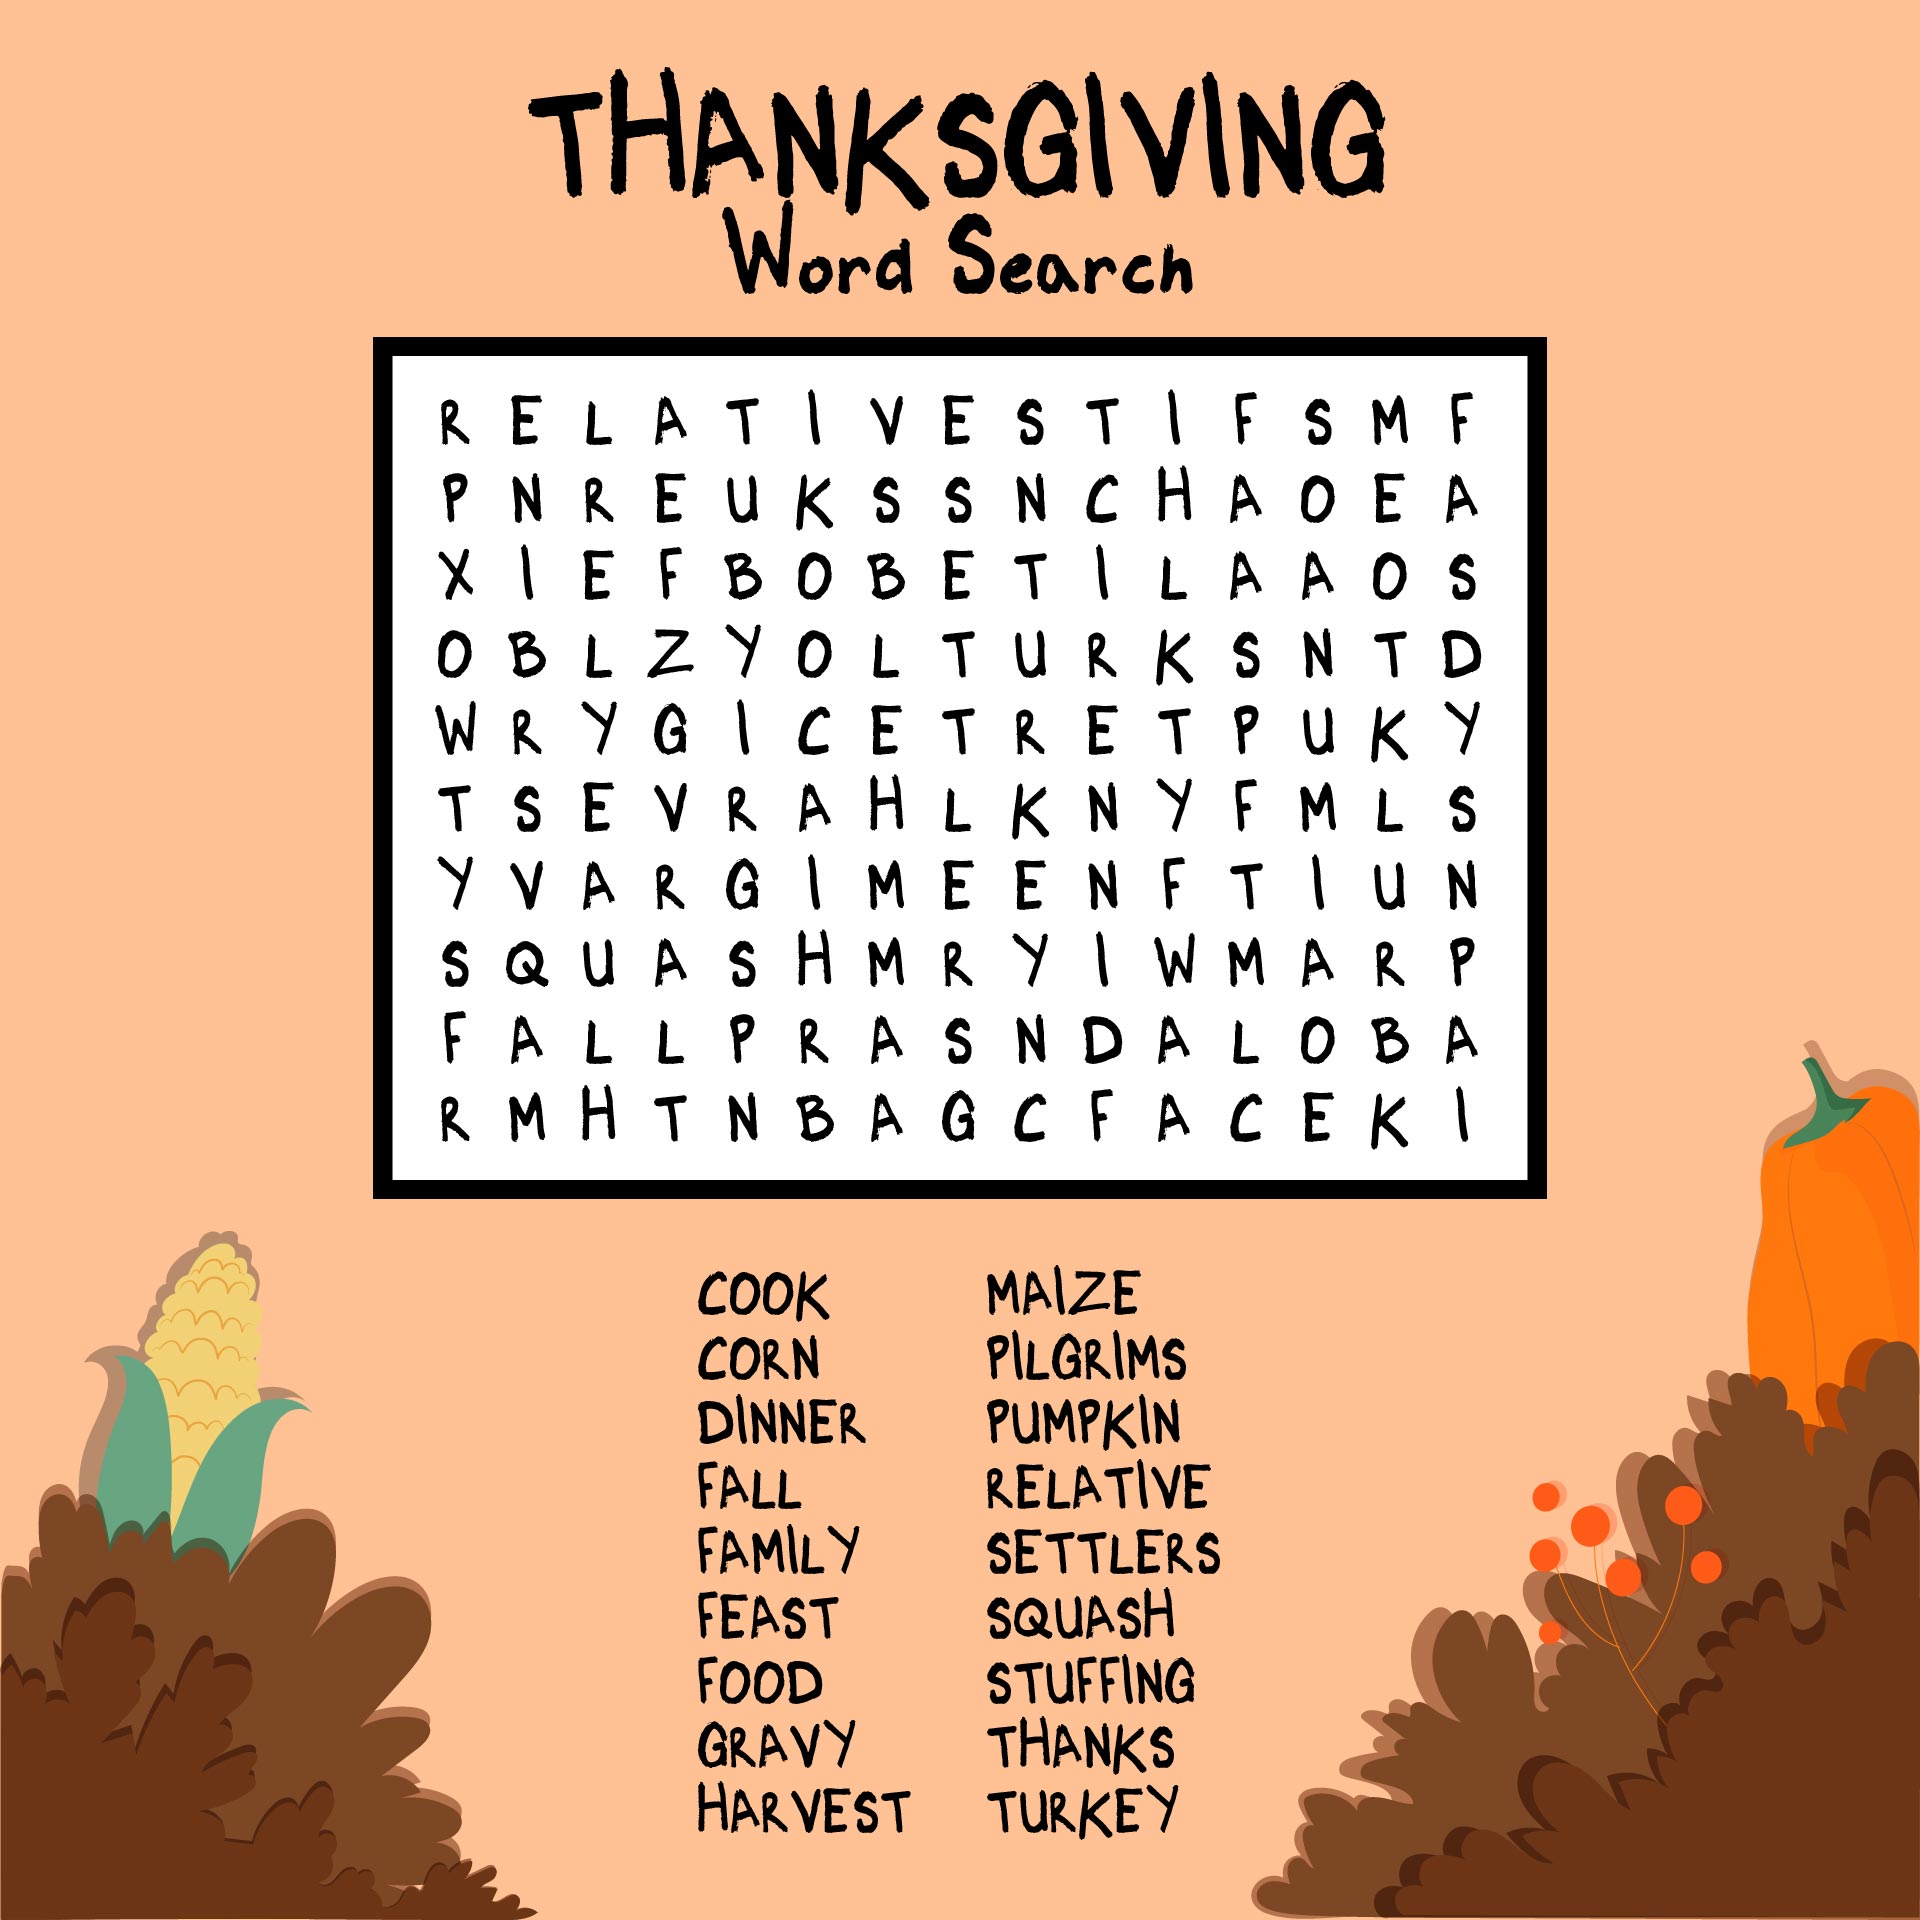 Thanksgiving History Word Search Printable